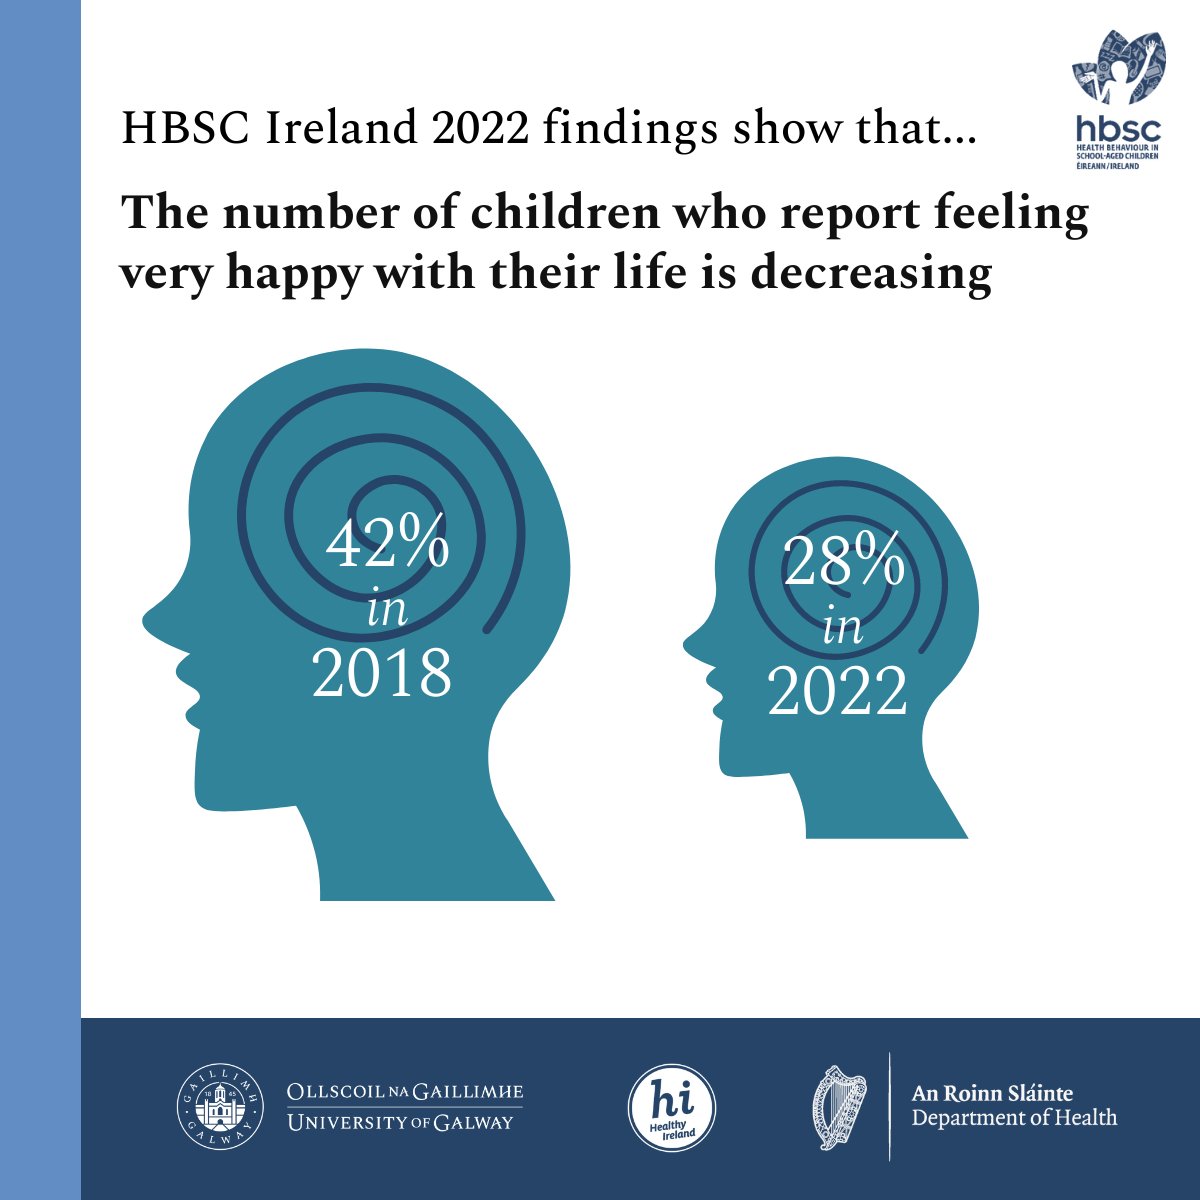 Key findings from the #HBSCIreland study on child and adolescent mental health and wellbeing. 28% of children in 2022 reported feeling very happy with their lives, in 2018 this was 42%. Check out the full report here➡️rb.gy/lxfda1 #childhealth #adolescenthealth